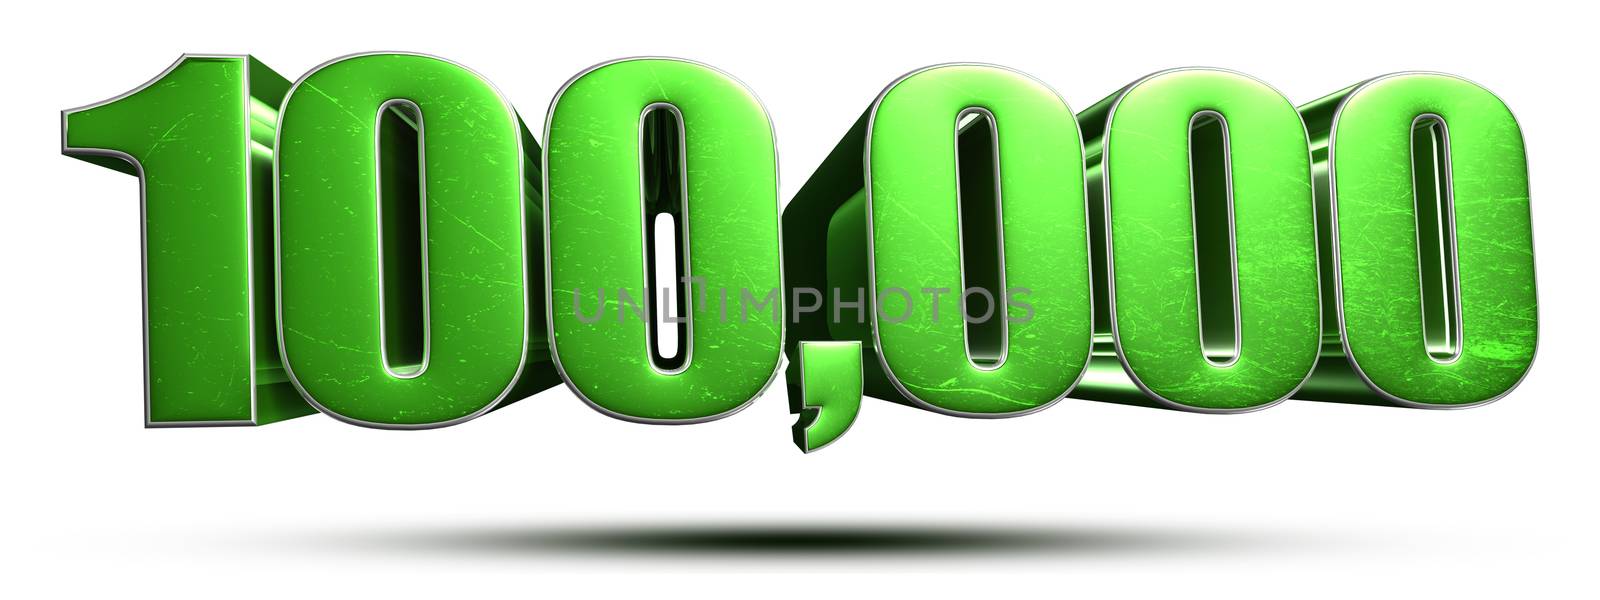 1 hundred thousand numbers green 3d rendering on white background.(with Clipping Path).